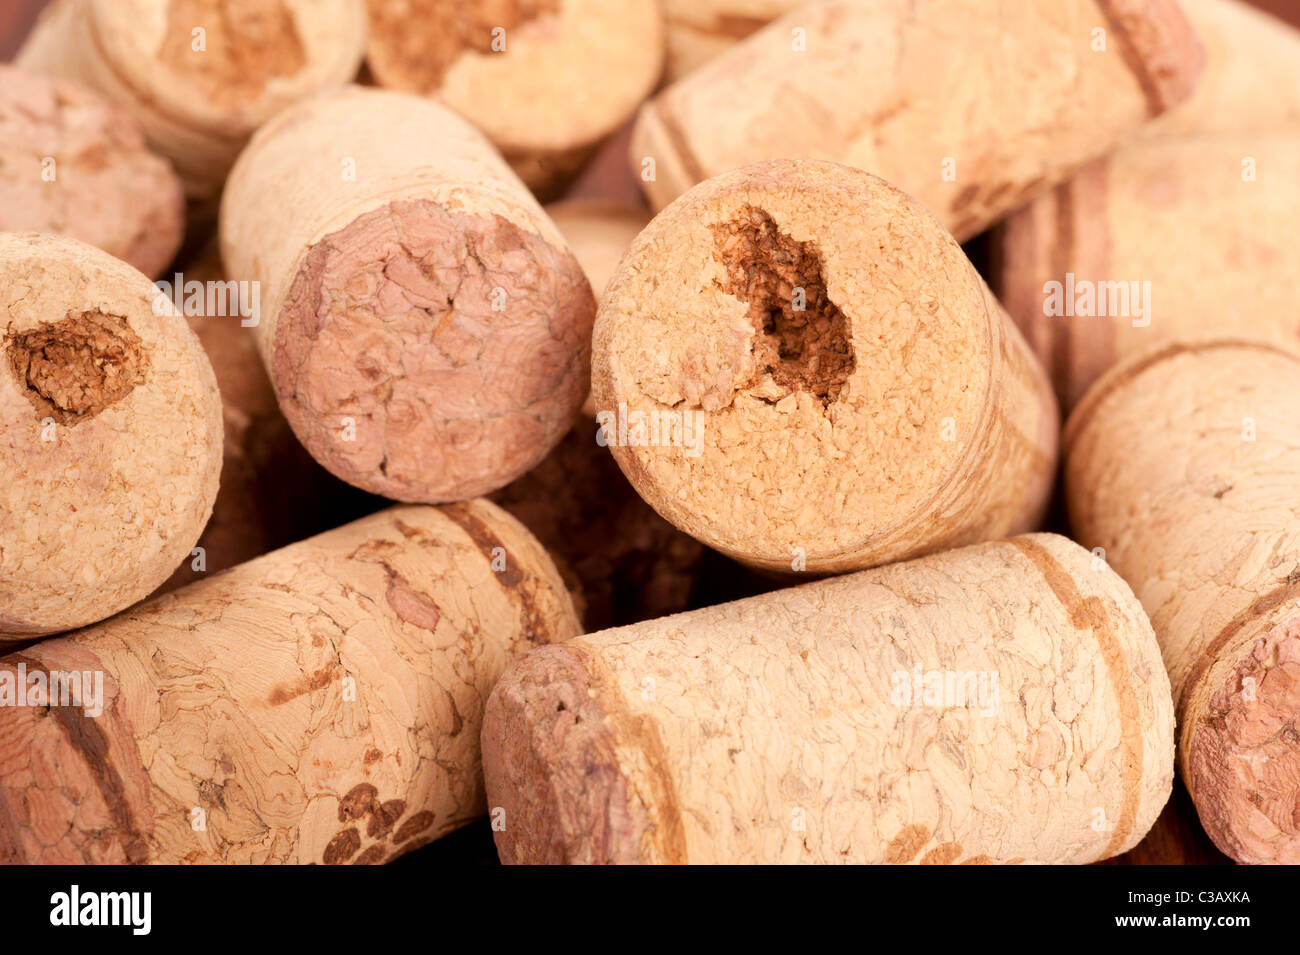 A pile of used wine bottle corks, also known as stoppers. Stock Photo